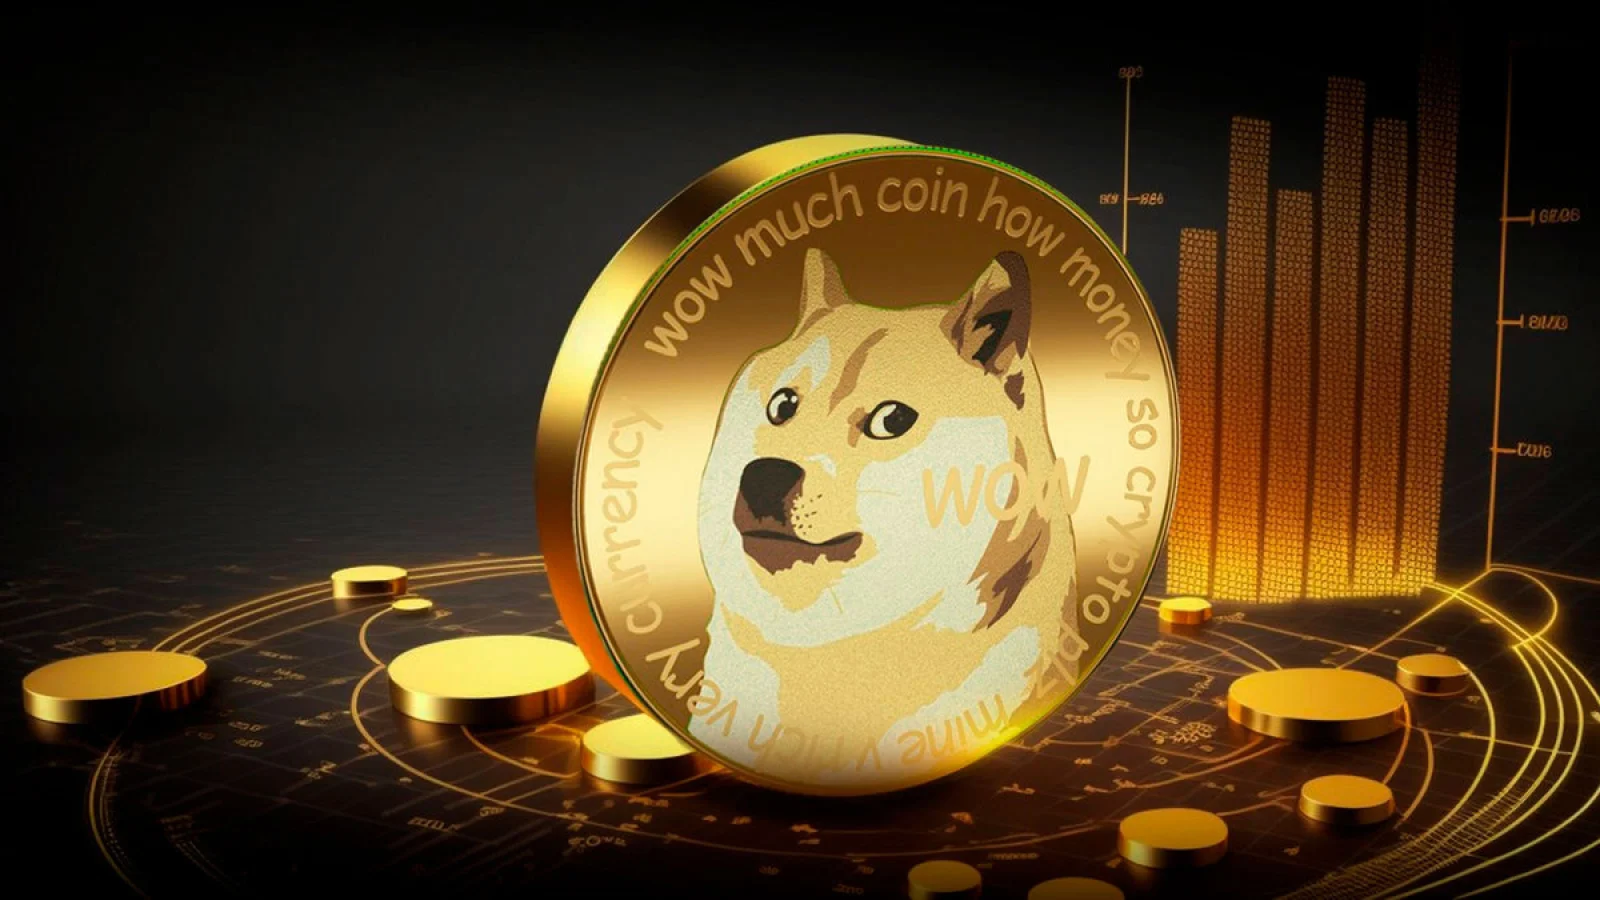 Scientist Doge (SCDOGE) Poised for Immense Gains After Launch, Will it Match SHIB and DOGE?